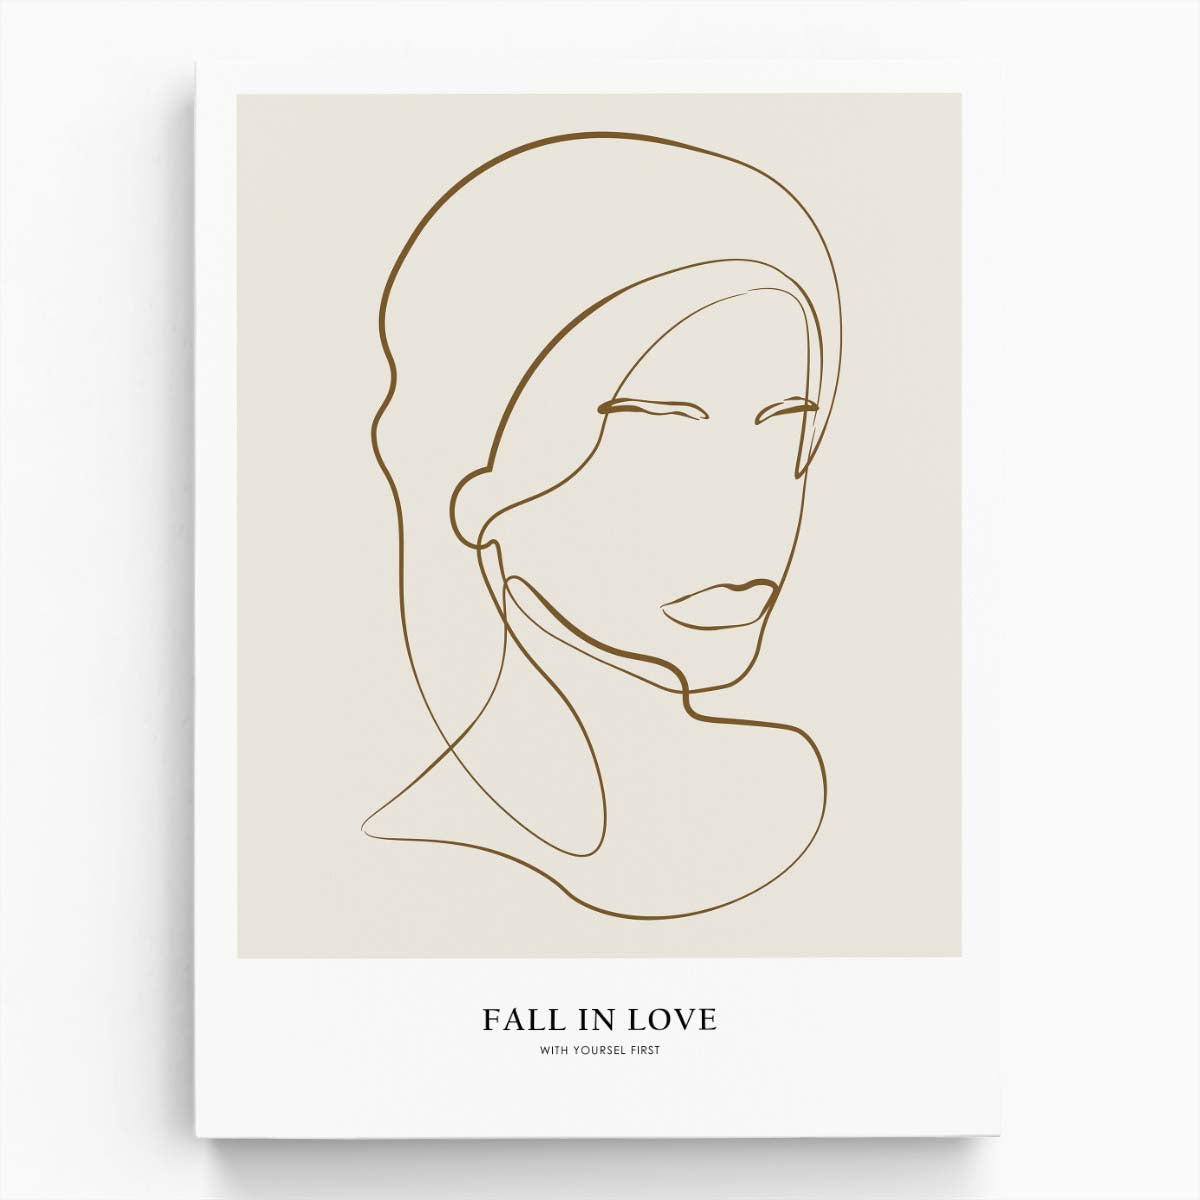 Modern Minimalist Woman Portrait Line Art Illustration with Motivational Quote by Luxuriance Designs, made in USA